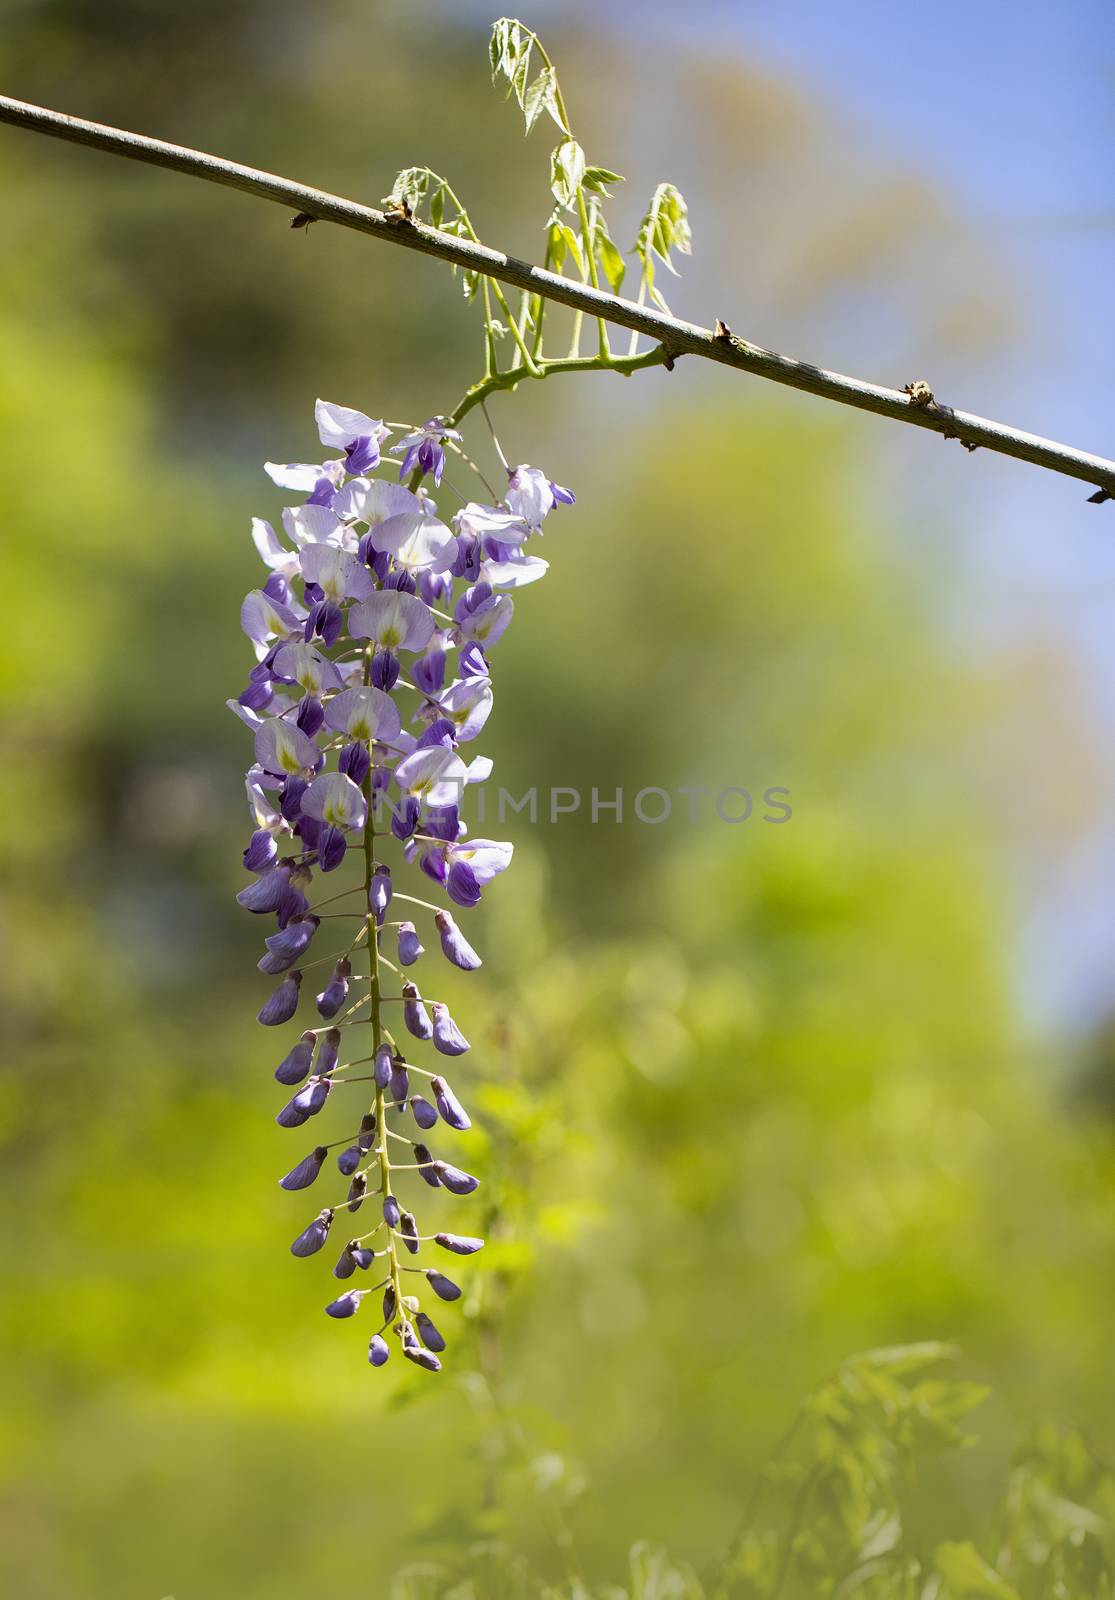 Purple wisteria racemes hang in the April sunshine.